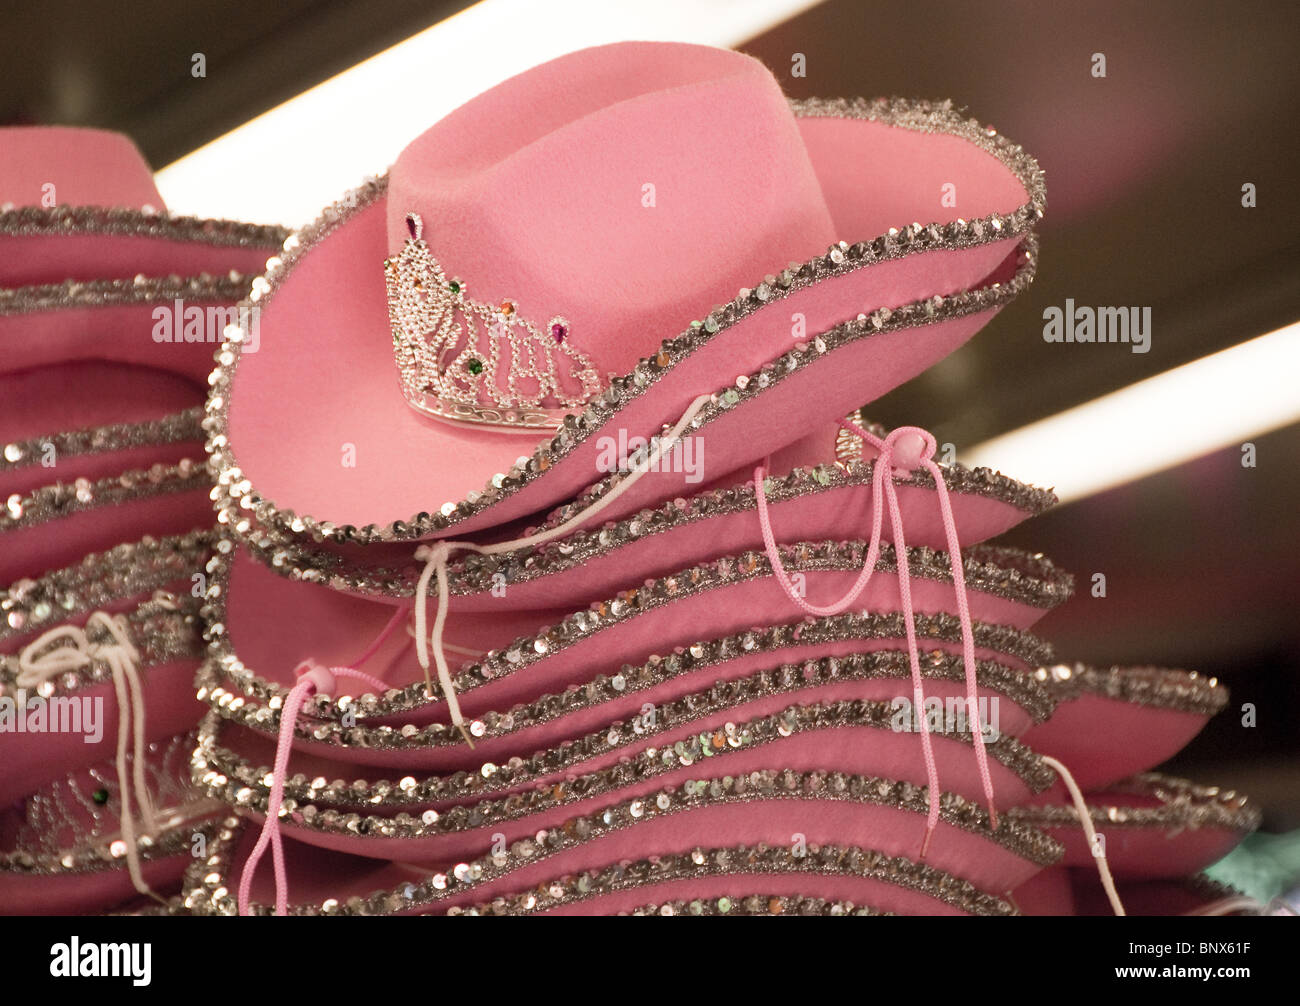 Pink Hats High Resolution Stock Photography and Images - Alamy